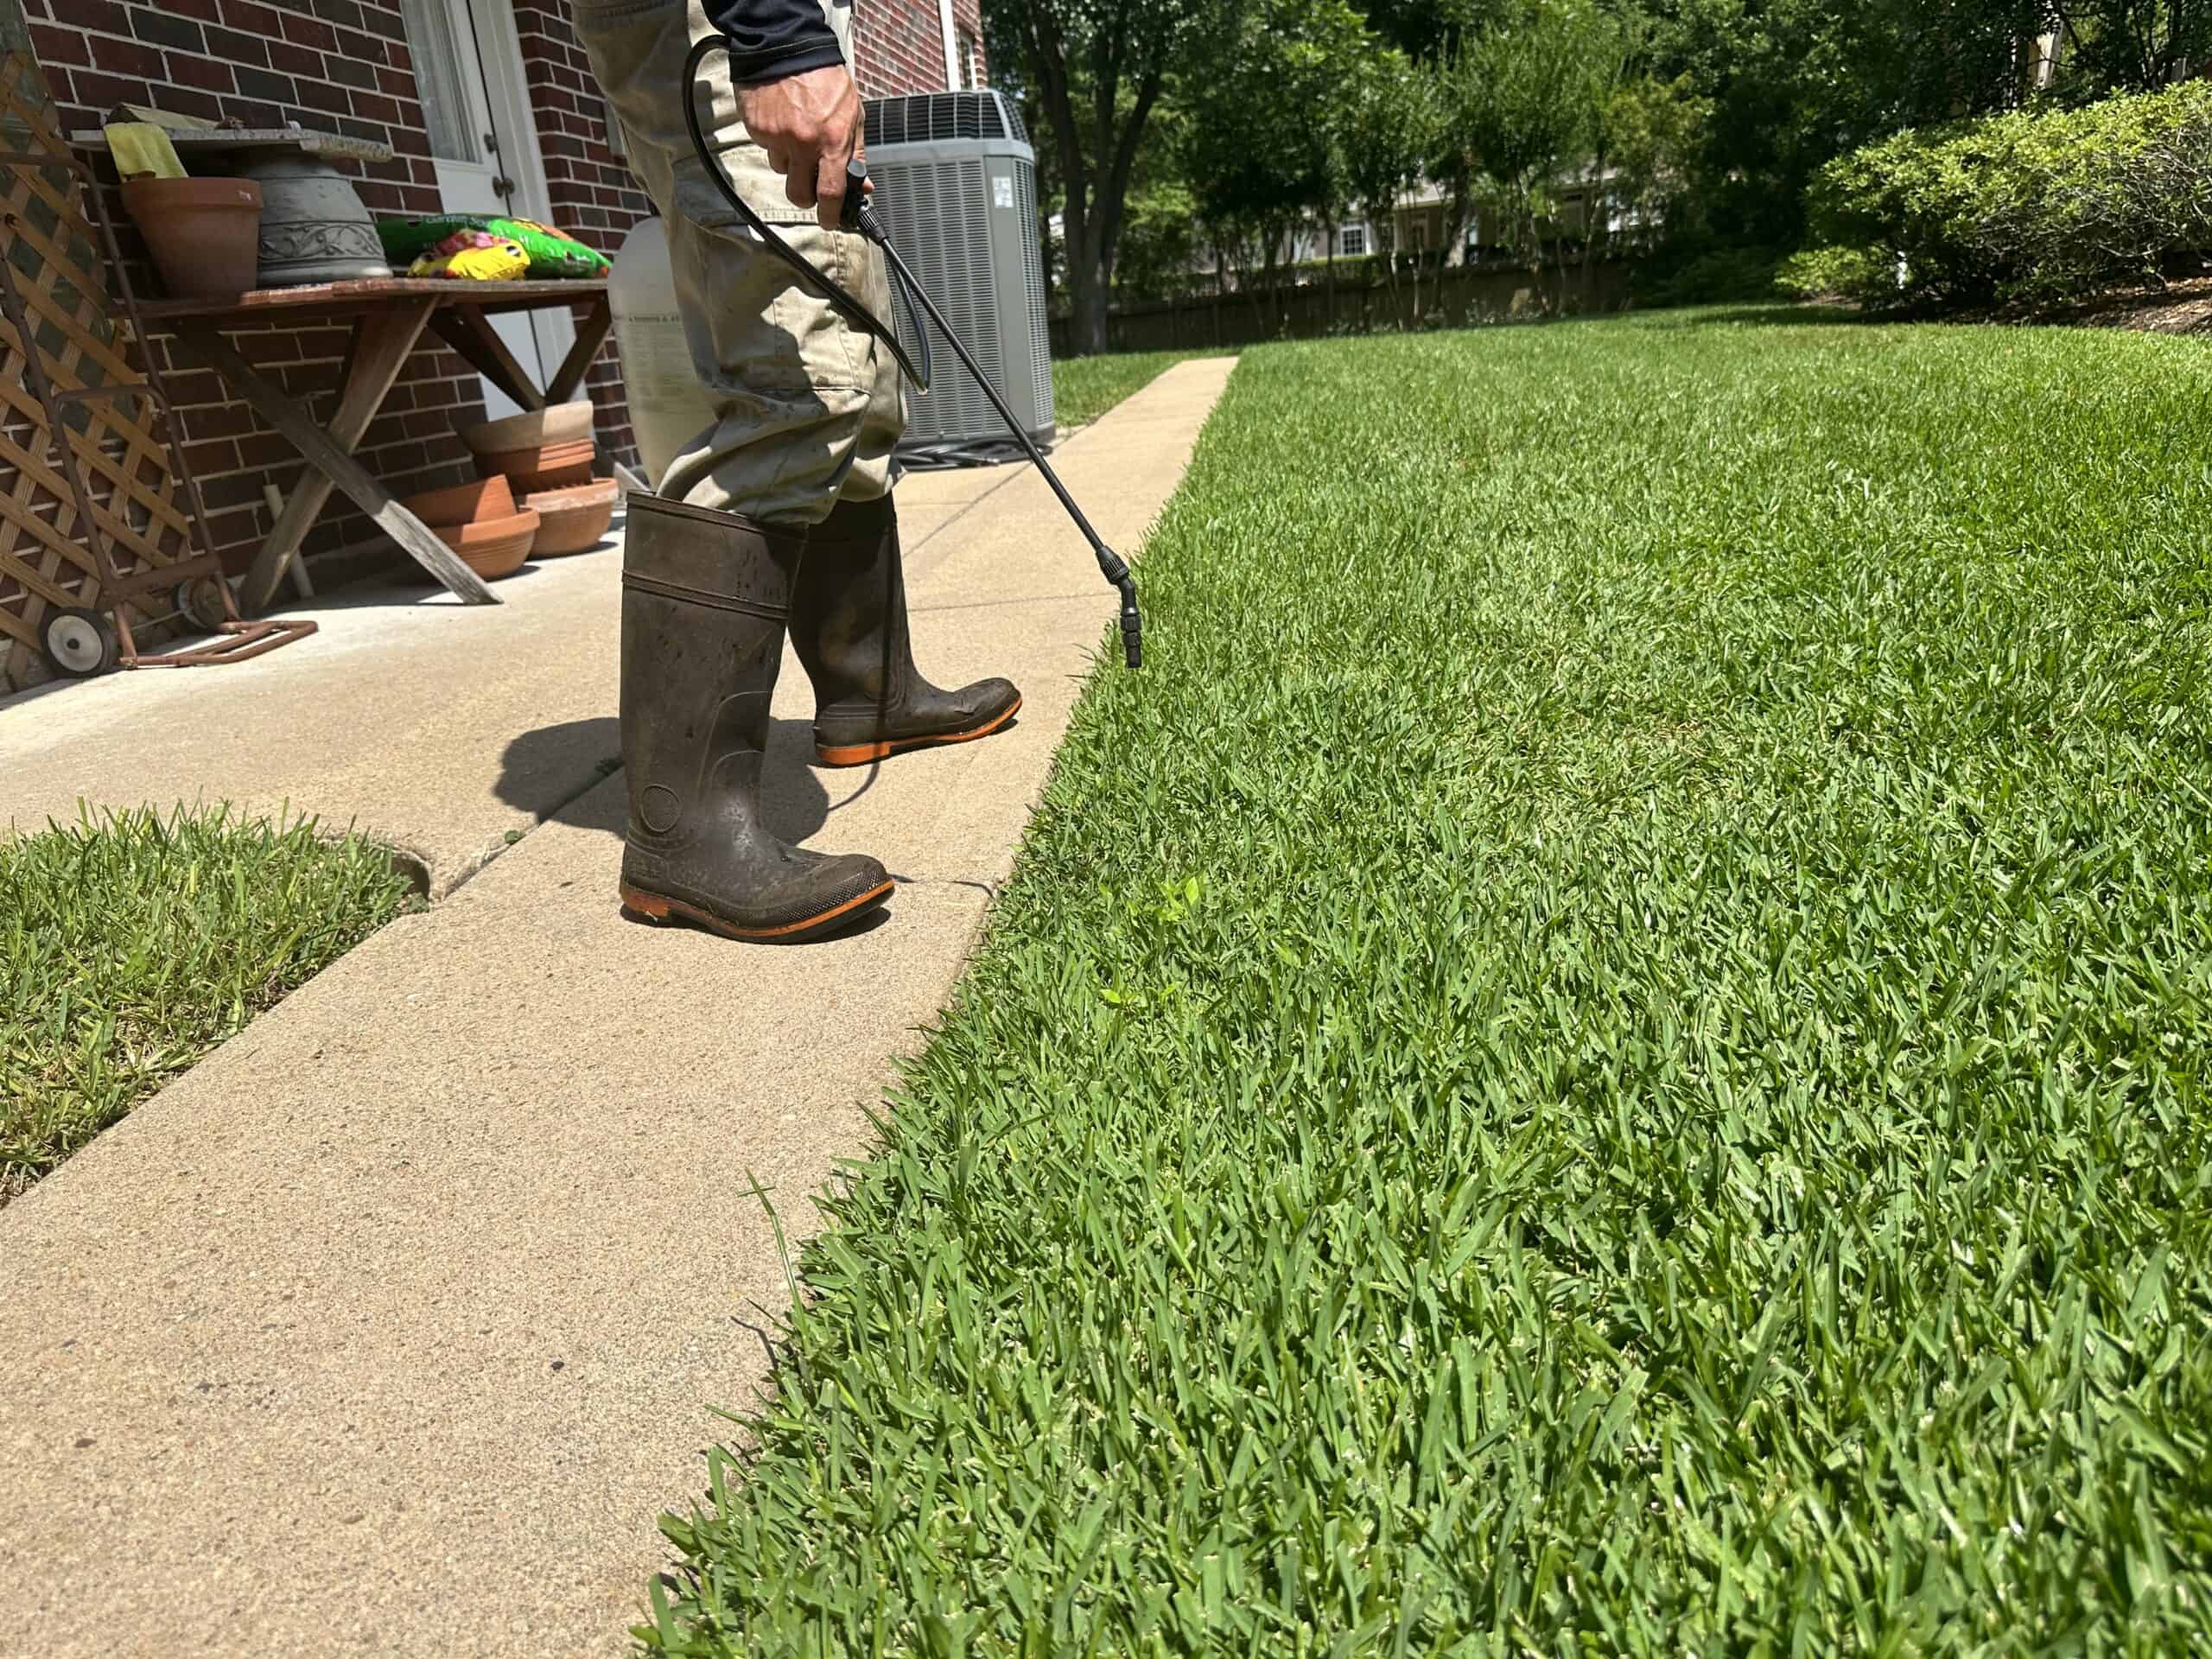 Is your lawn dealing with soil compaction? Find out how liquid aeration can transform your grass with CLS Lawn & Pest.